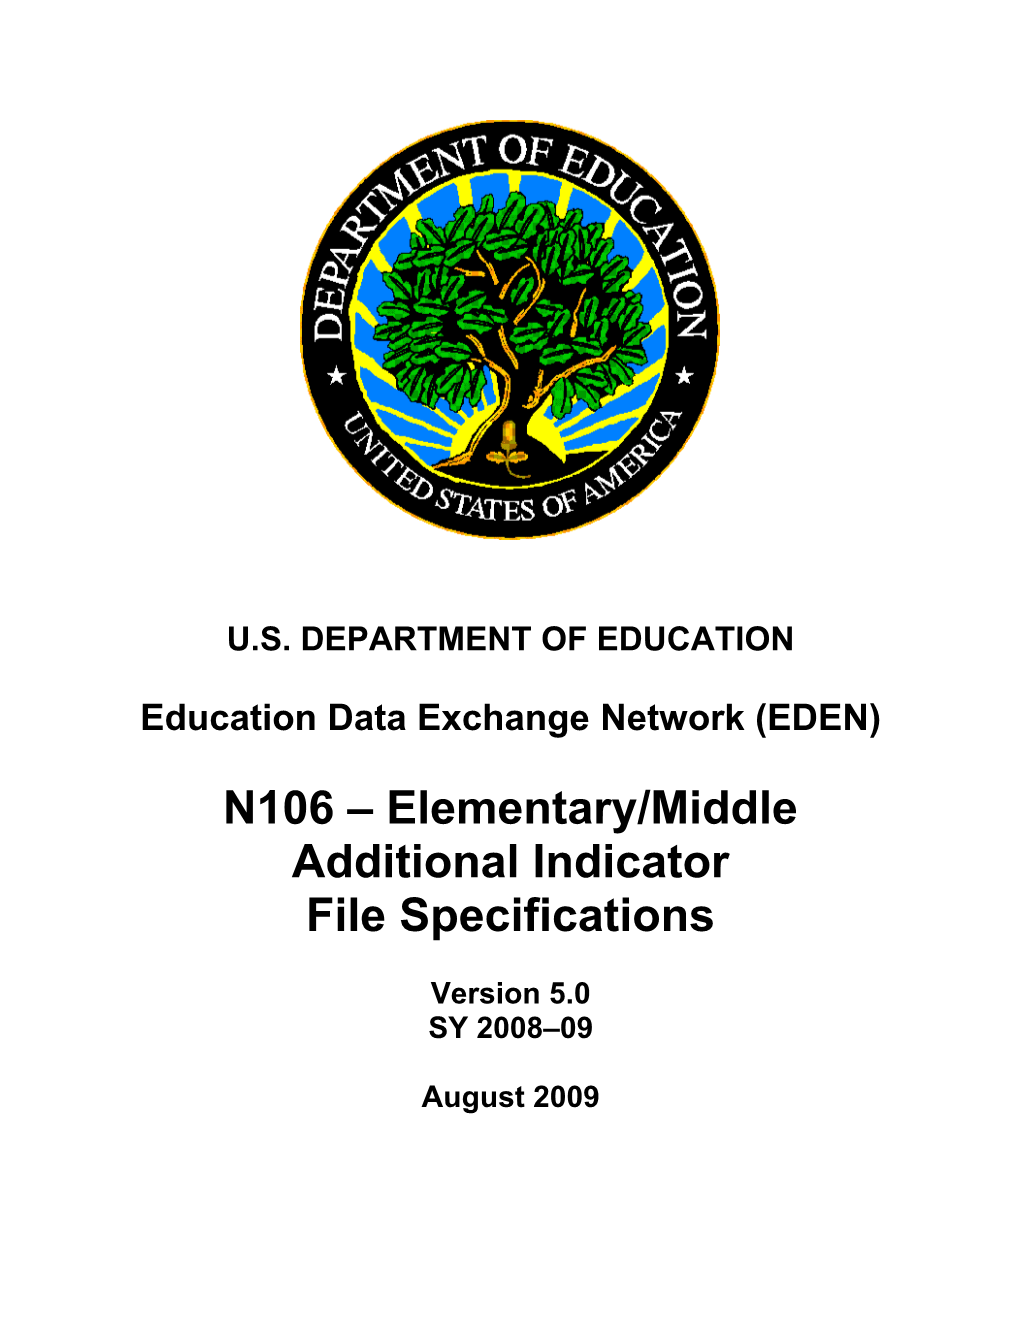 N106 Elementary/Middle Additional Indicator File Specifications (MS Word)